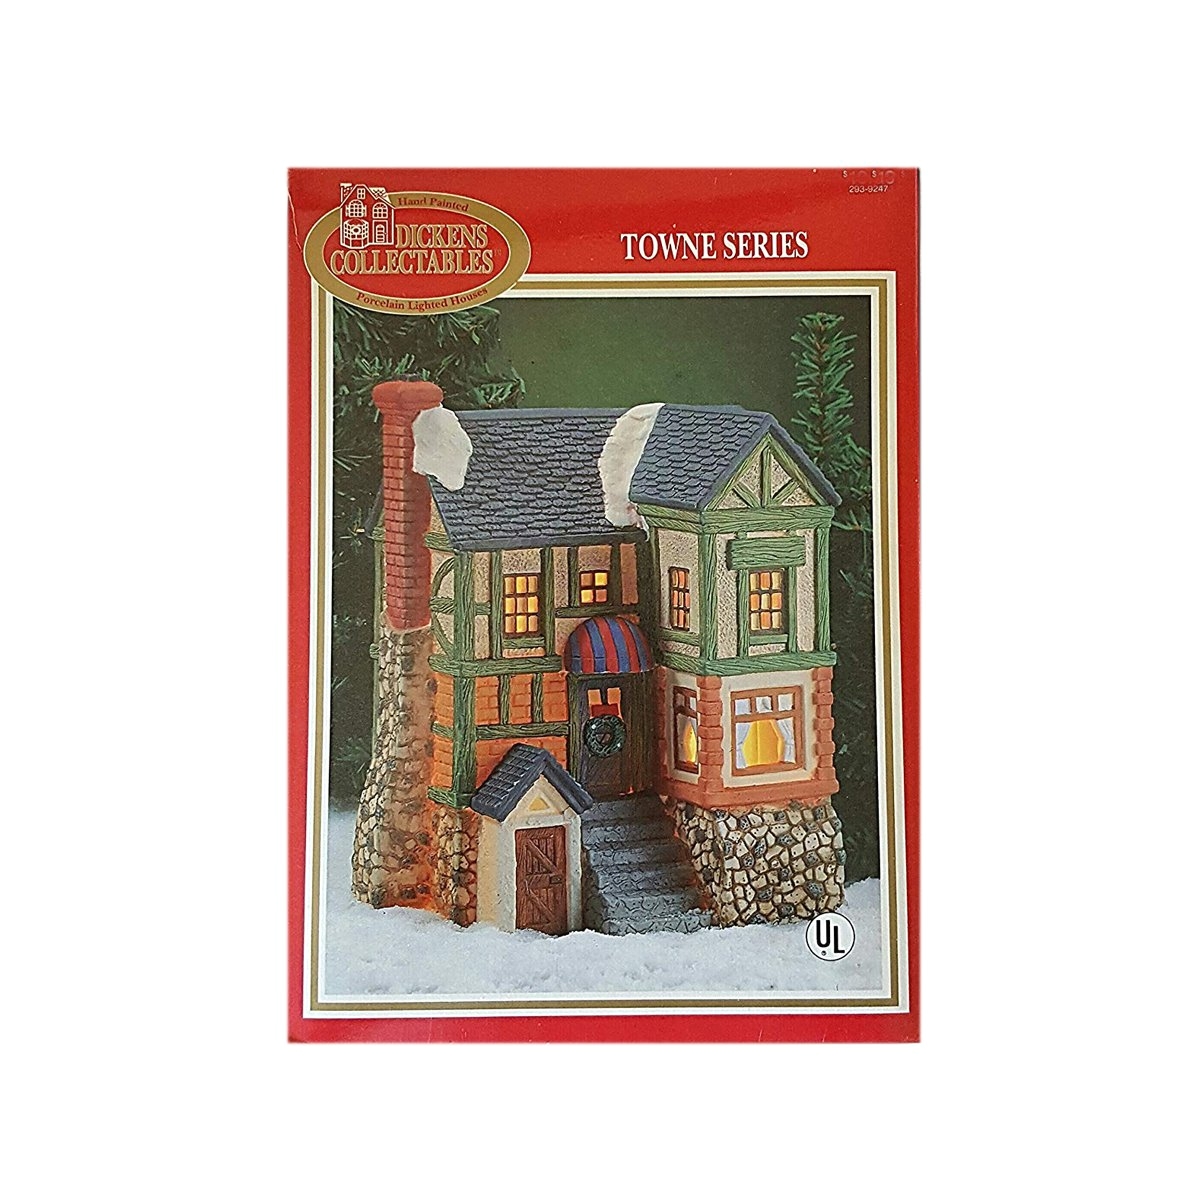 1996 dickens collectibles towne series porcelain lighted house 293 9247 walmart com